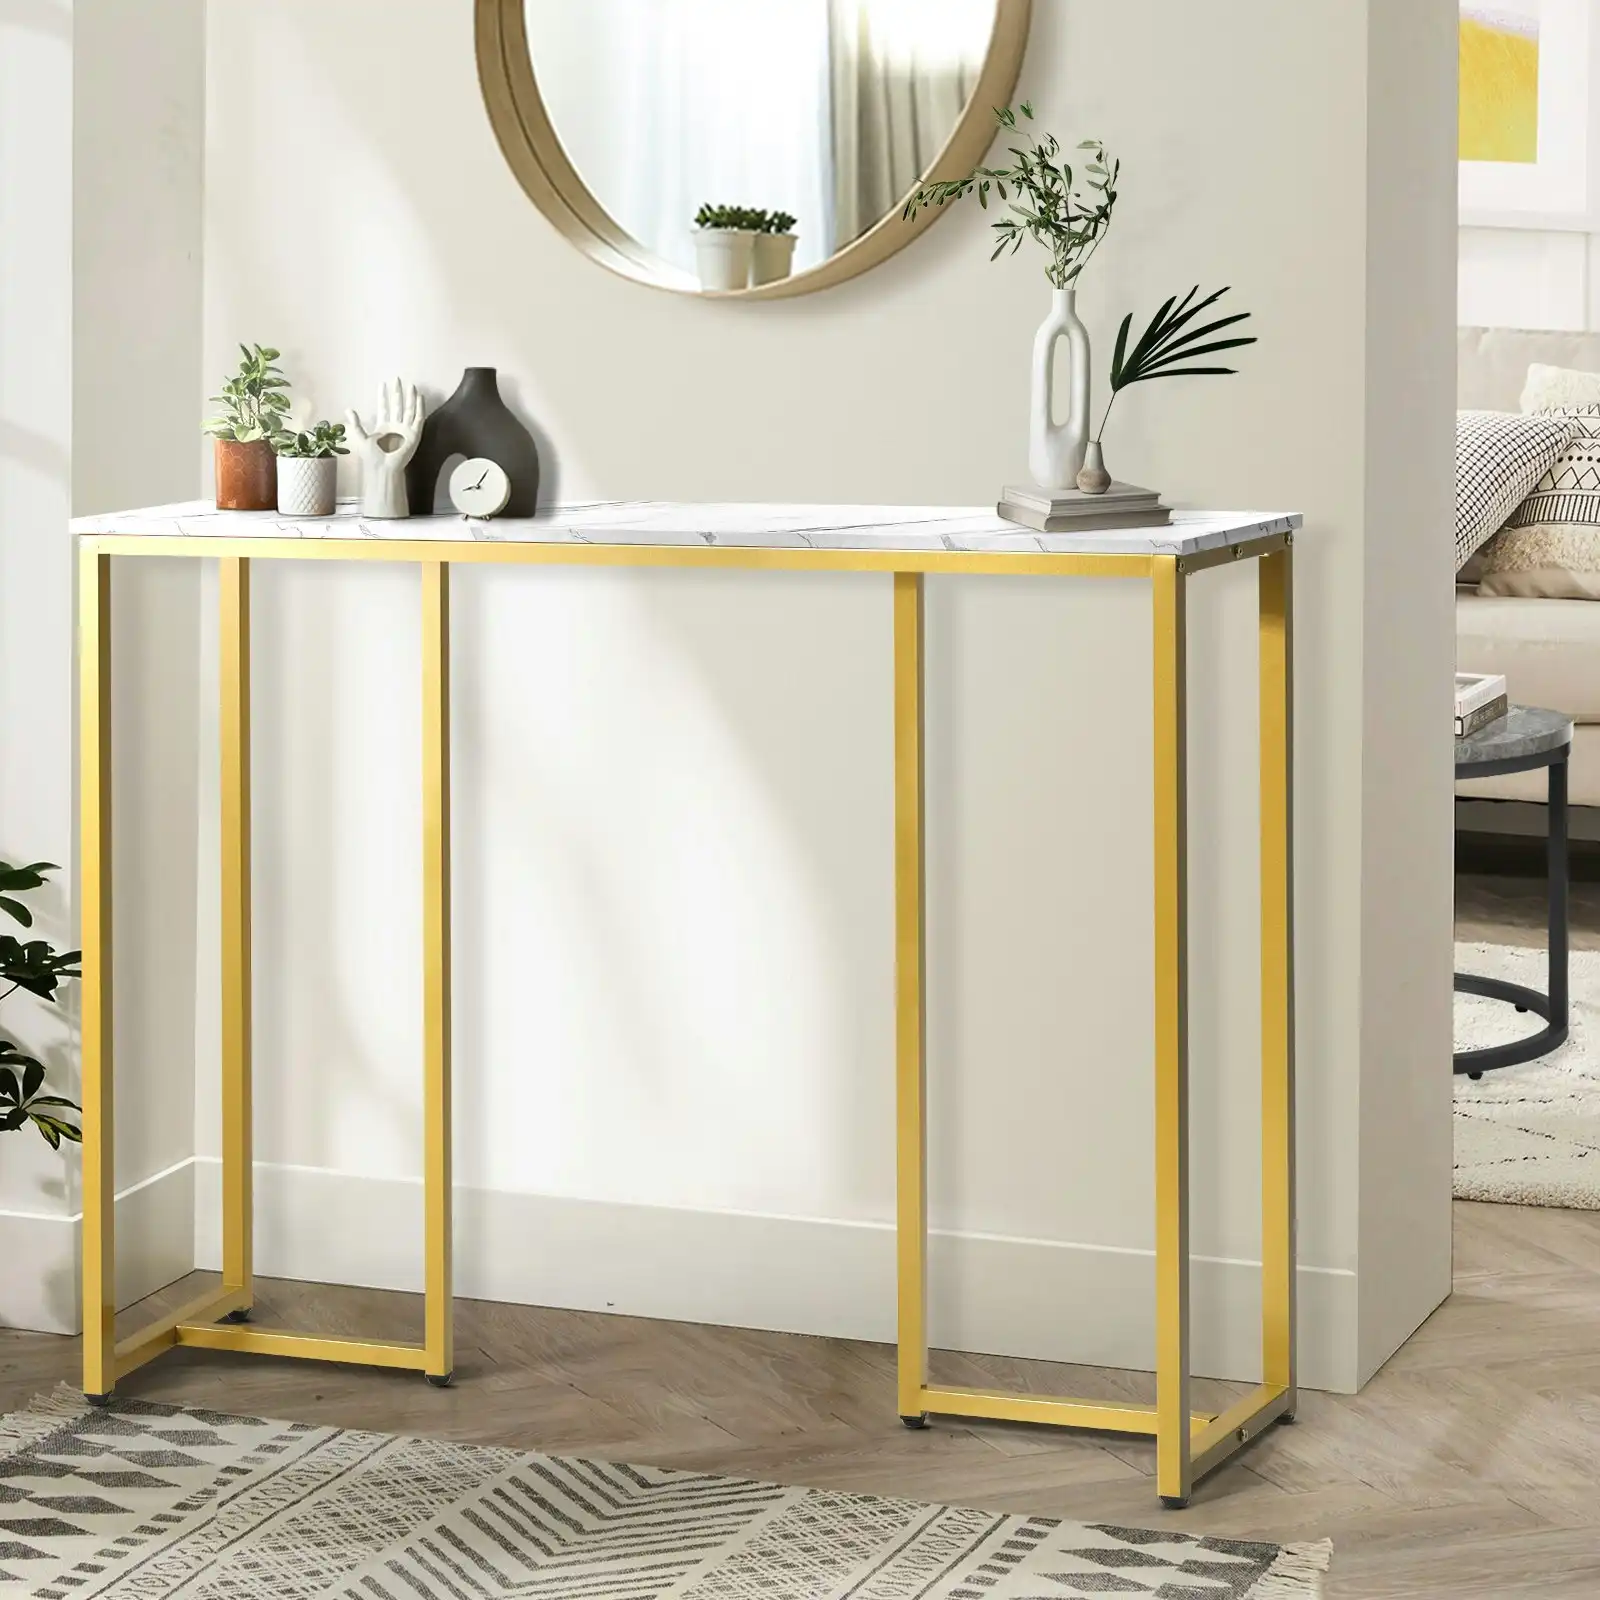 Oikiture Console Table Hallway Entry Side Tables Marble Effect Hall Display White&Gold